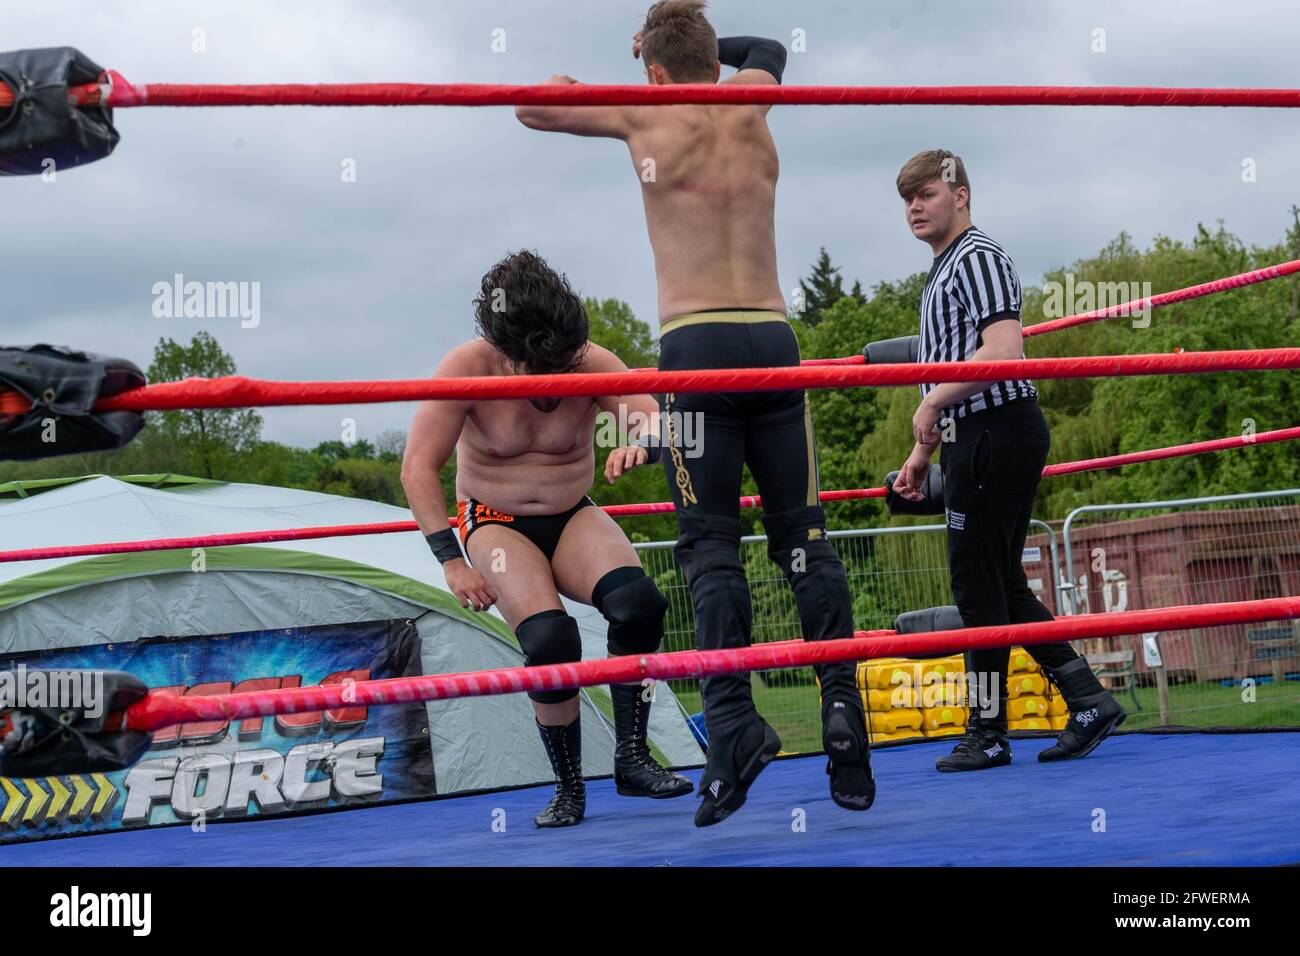 Brentwood Essex 22nd May 2021 The Weald Park Country show, Weald Festival of Dogs, Weald Festival of cars, Weald Country Park, Brentwood Essex, Wrestling display Credit: Ian Davidson/Alamy Live News Stock Photo